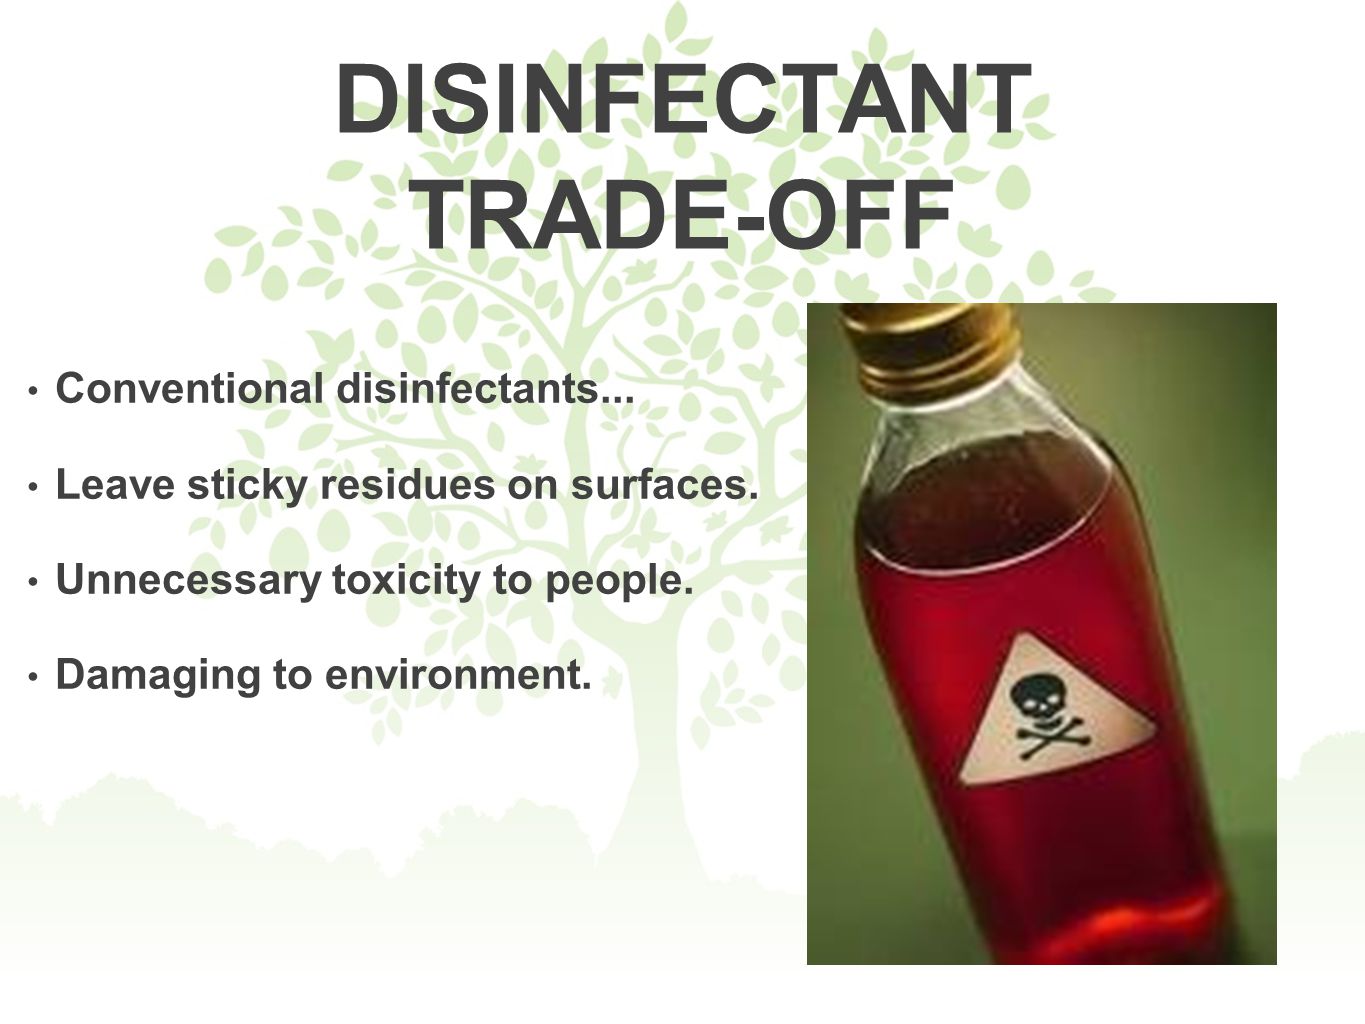 DISINFECTANT TRADE-OFF Conventional disinfectants...